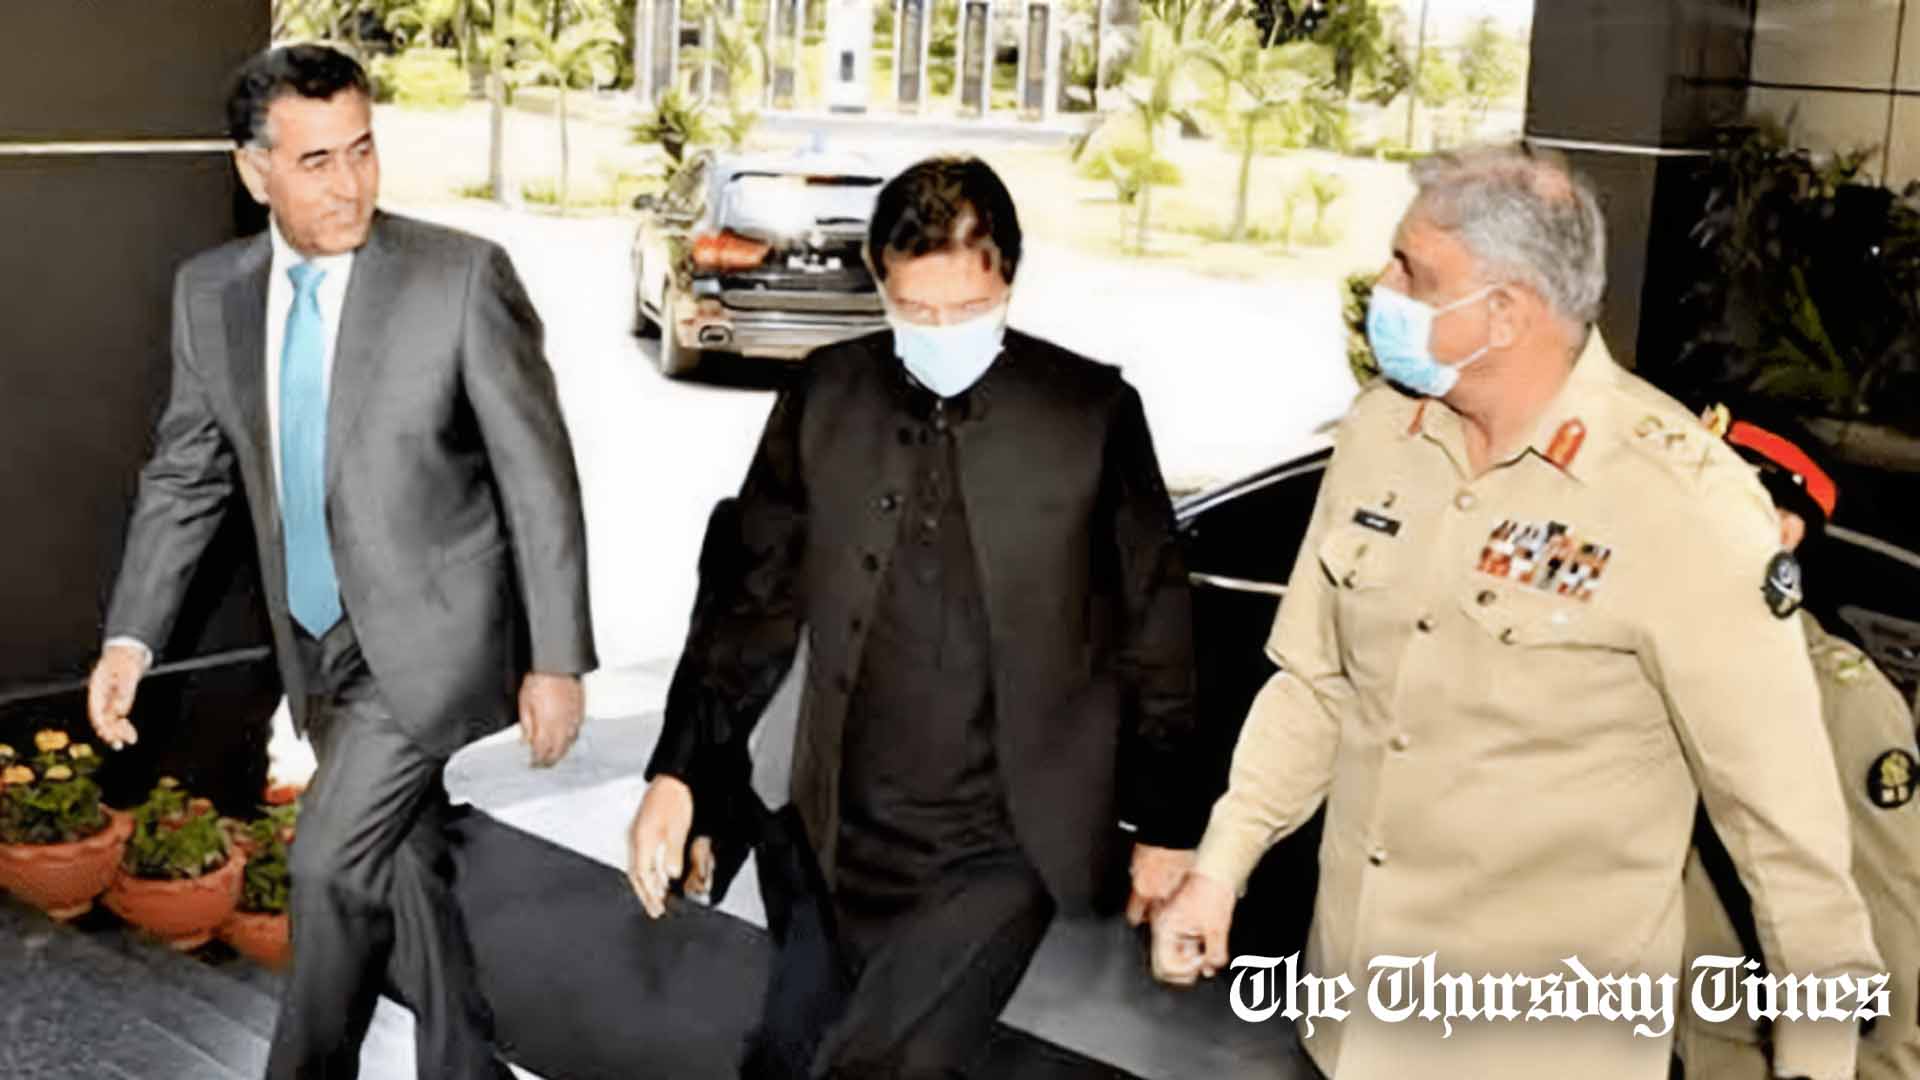 A file photo shows, from left to right, former ISI chief Faiz Hameed, PTI chairman Imran Khan, and former COAS Qamar Javed Bajwa. — FILE/THE THURSDAY TIMES